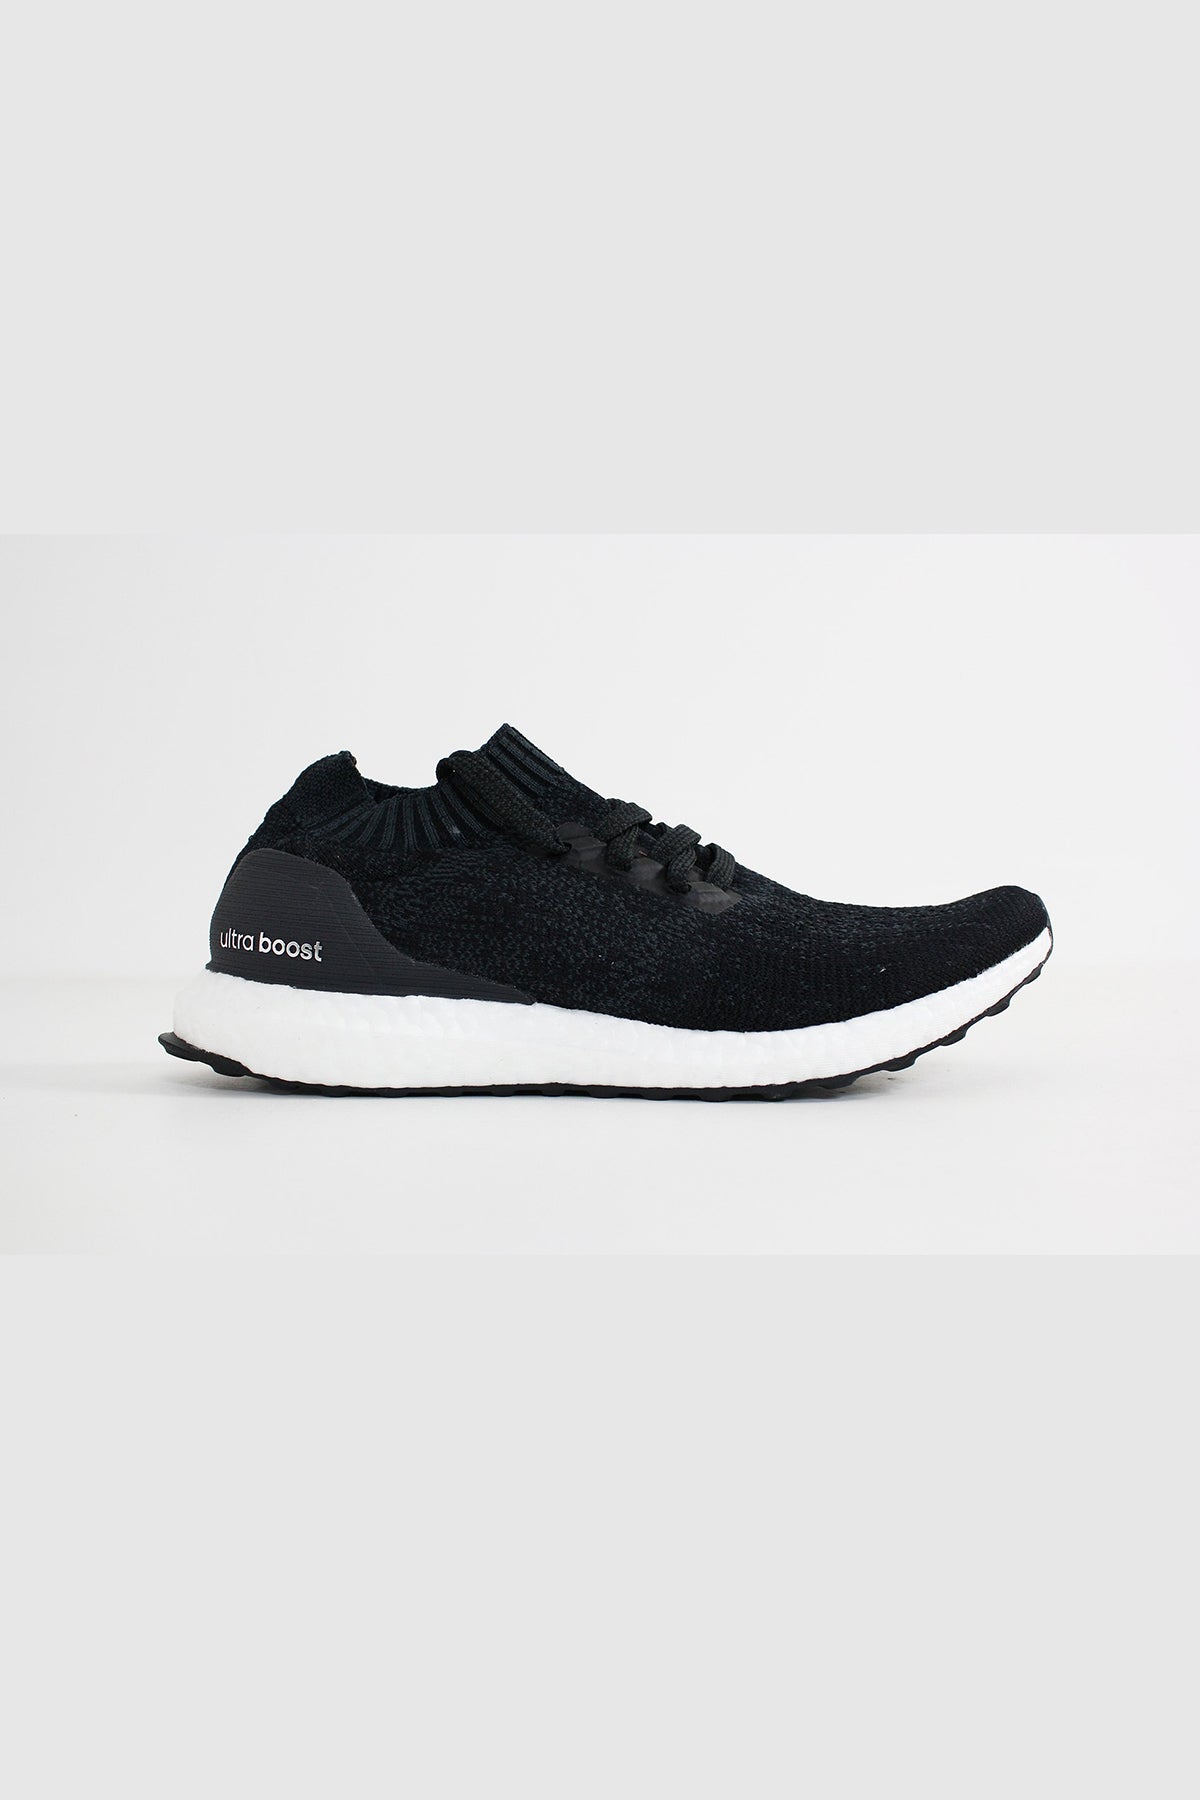 Adidas - Ultraboost Uncaged (Carbon 